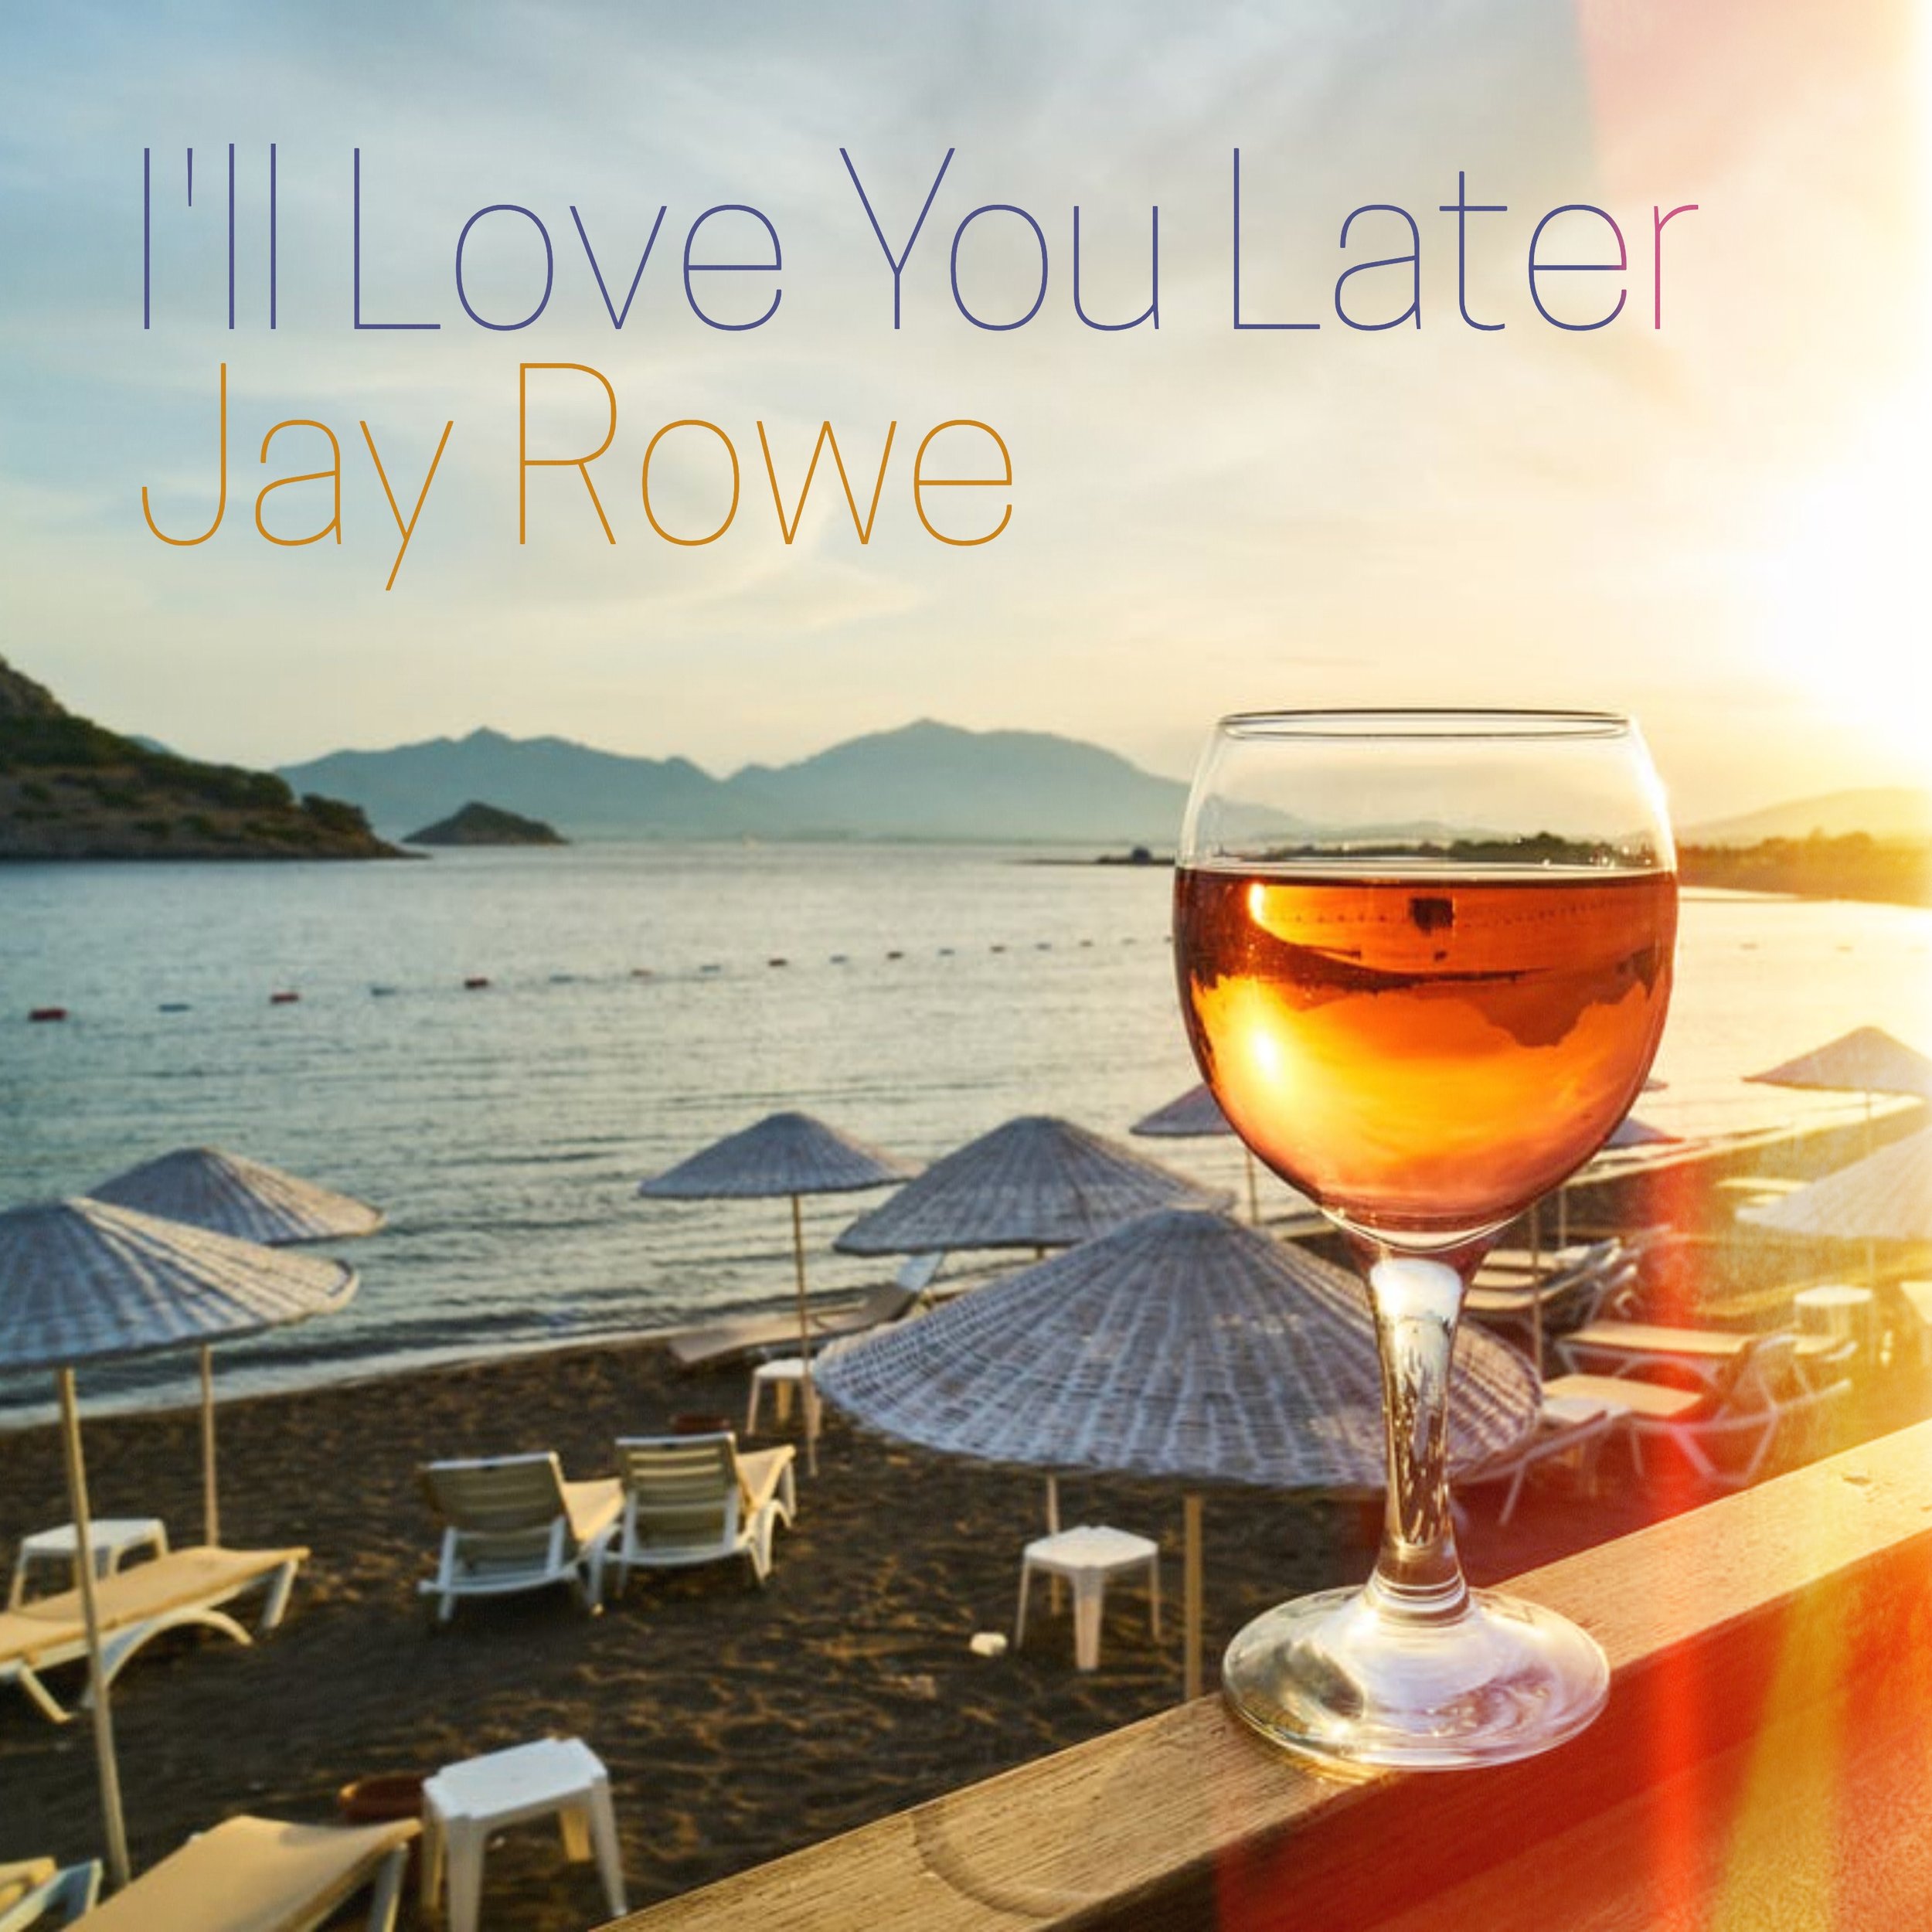 Jay Rowe I'll Love You Later - Cover 5.jpg